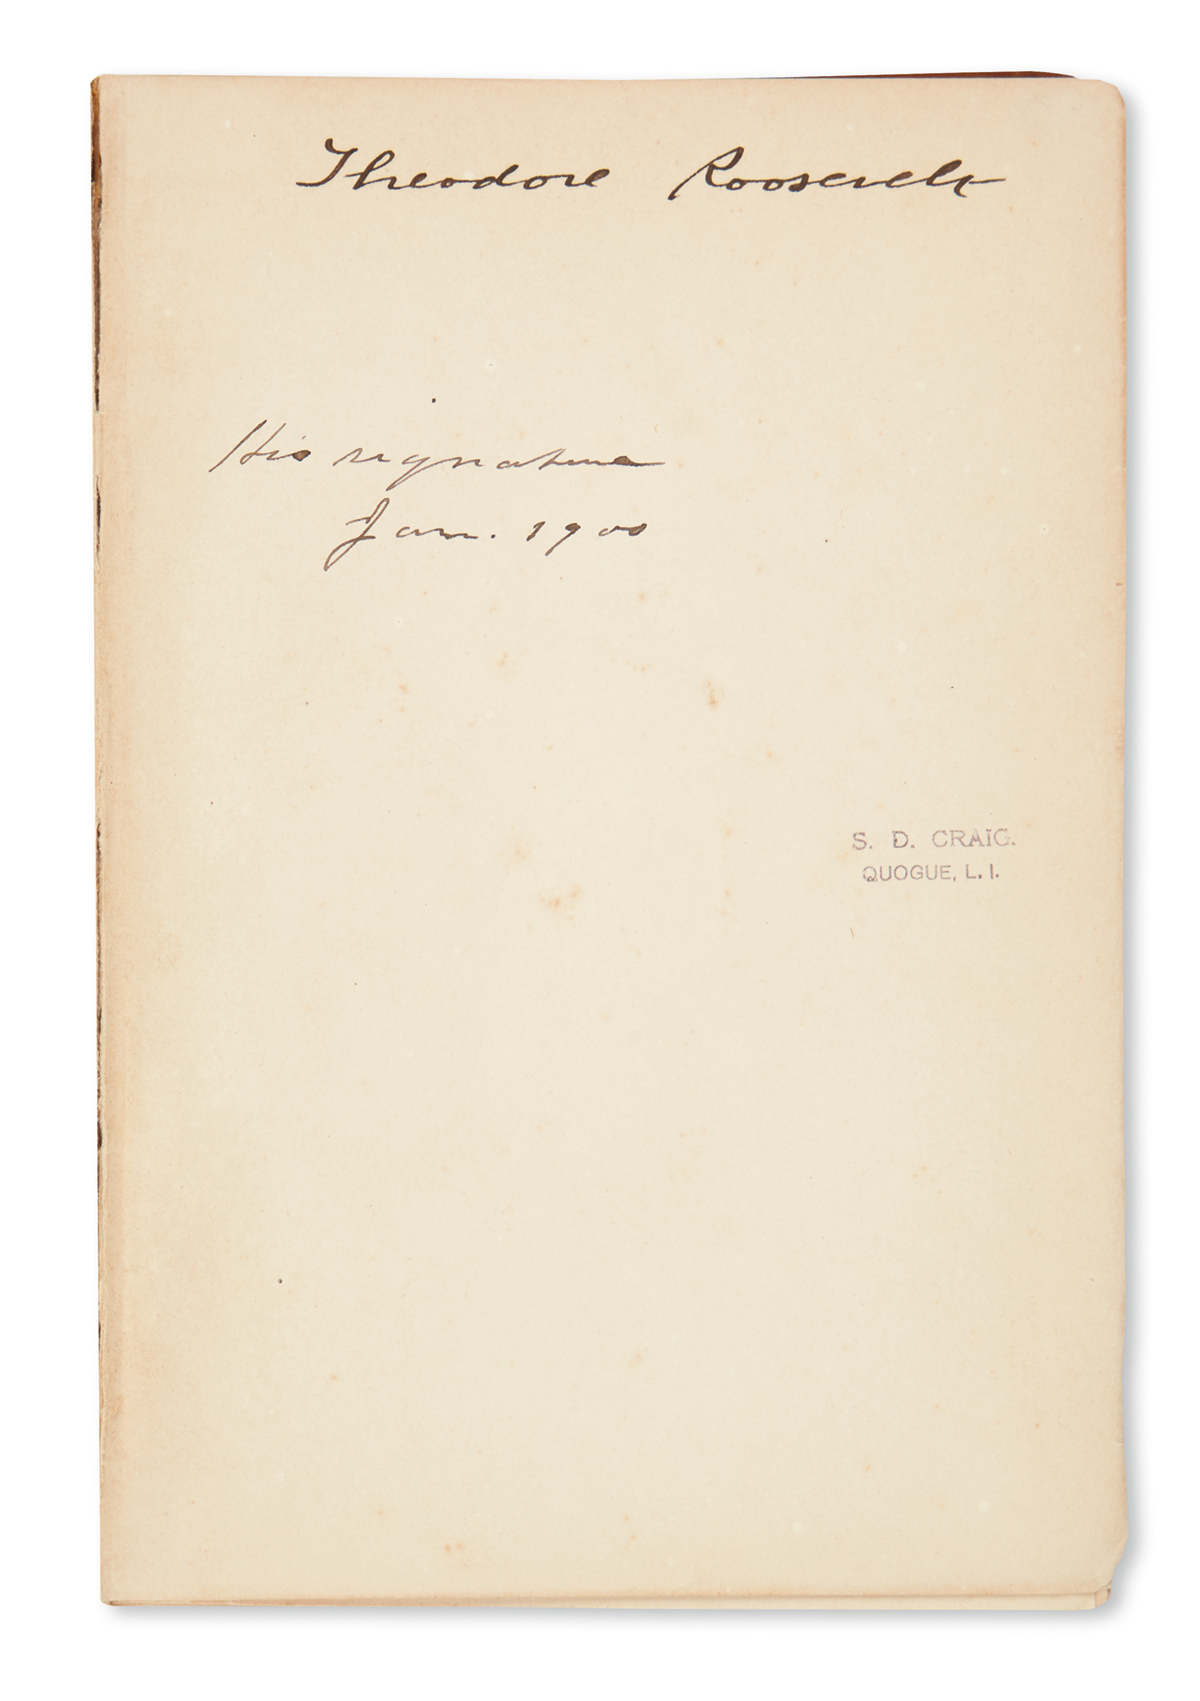 ROOSEVELT, THEODORE. The Rough Riders. Signed on the front free endpaper.